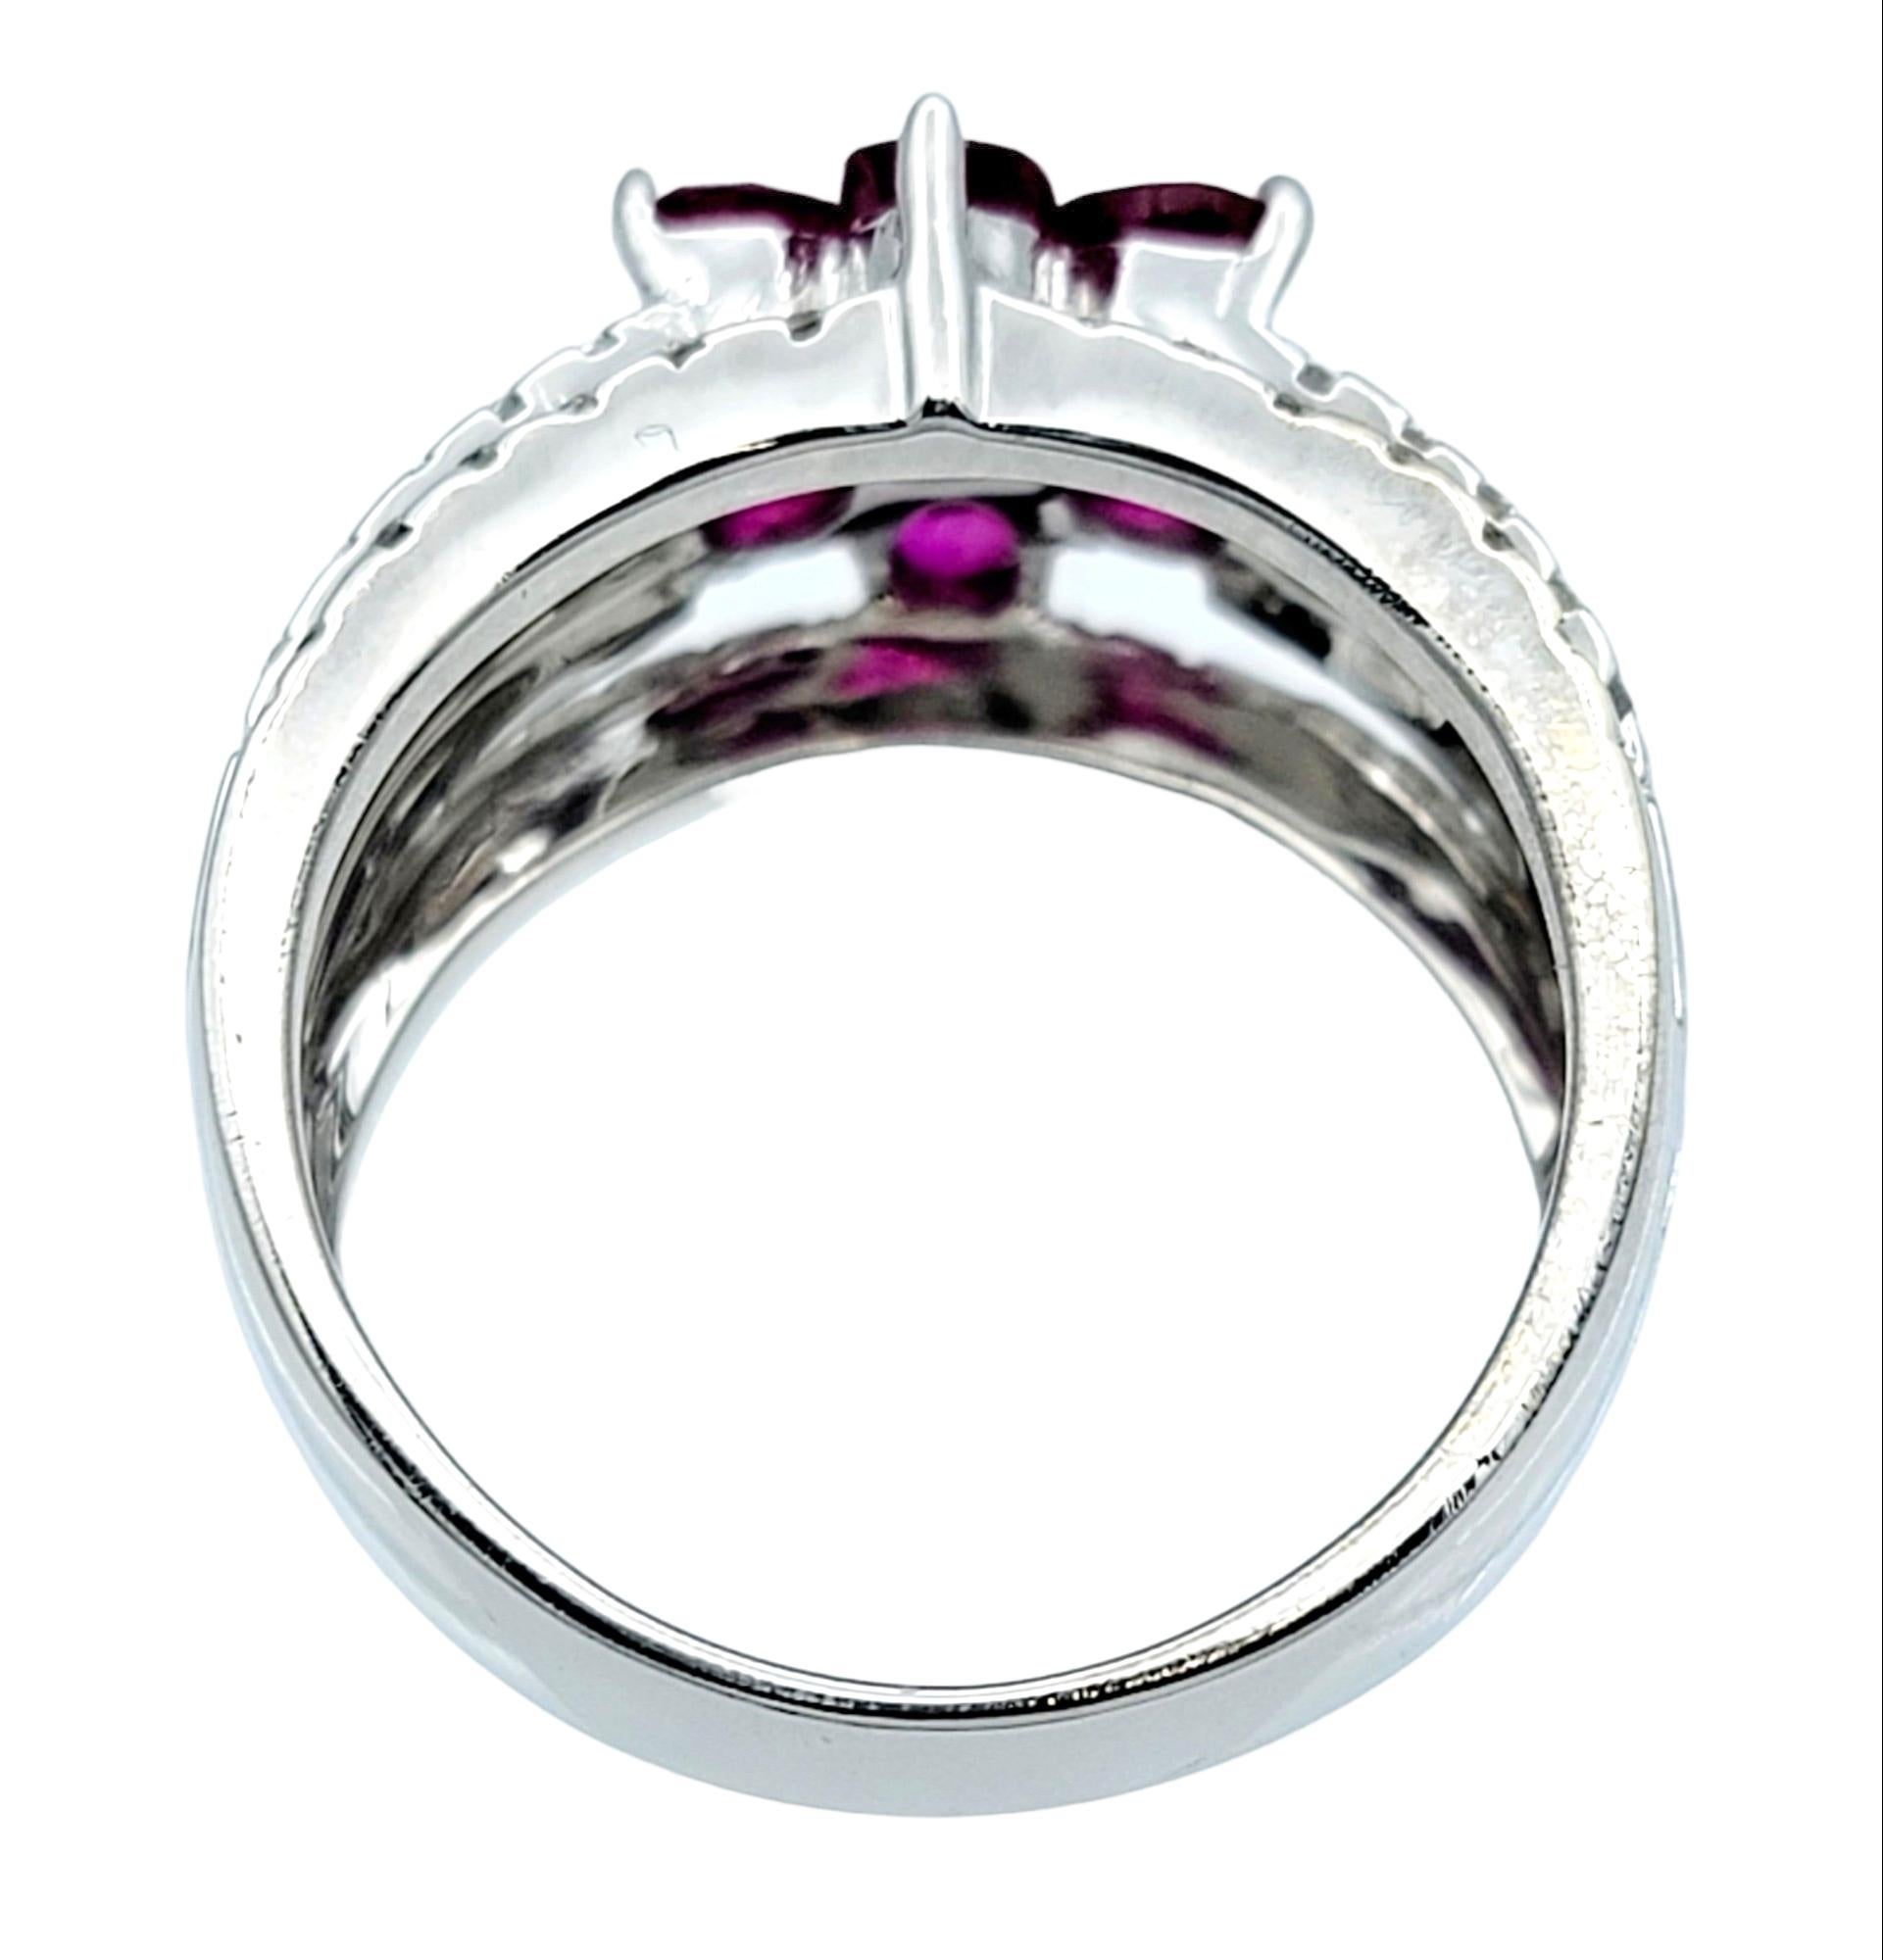 Le Vian Multi Row Diamond Band Ring with Ruby Flower Motif, 18 Karat White Gold In Good Condition For Sale In Scottsdale, AZ